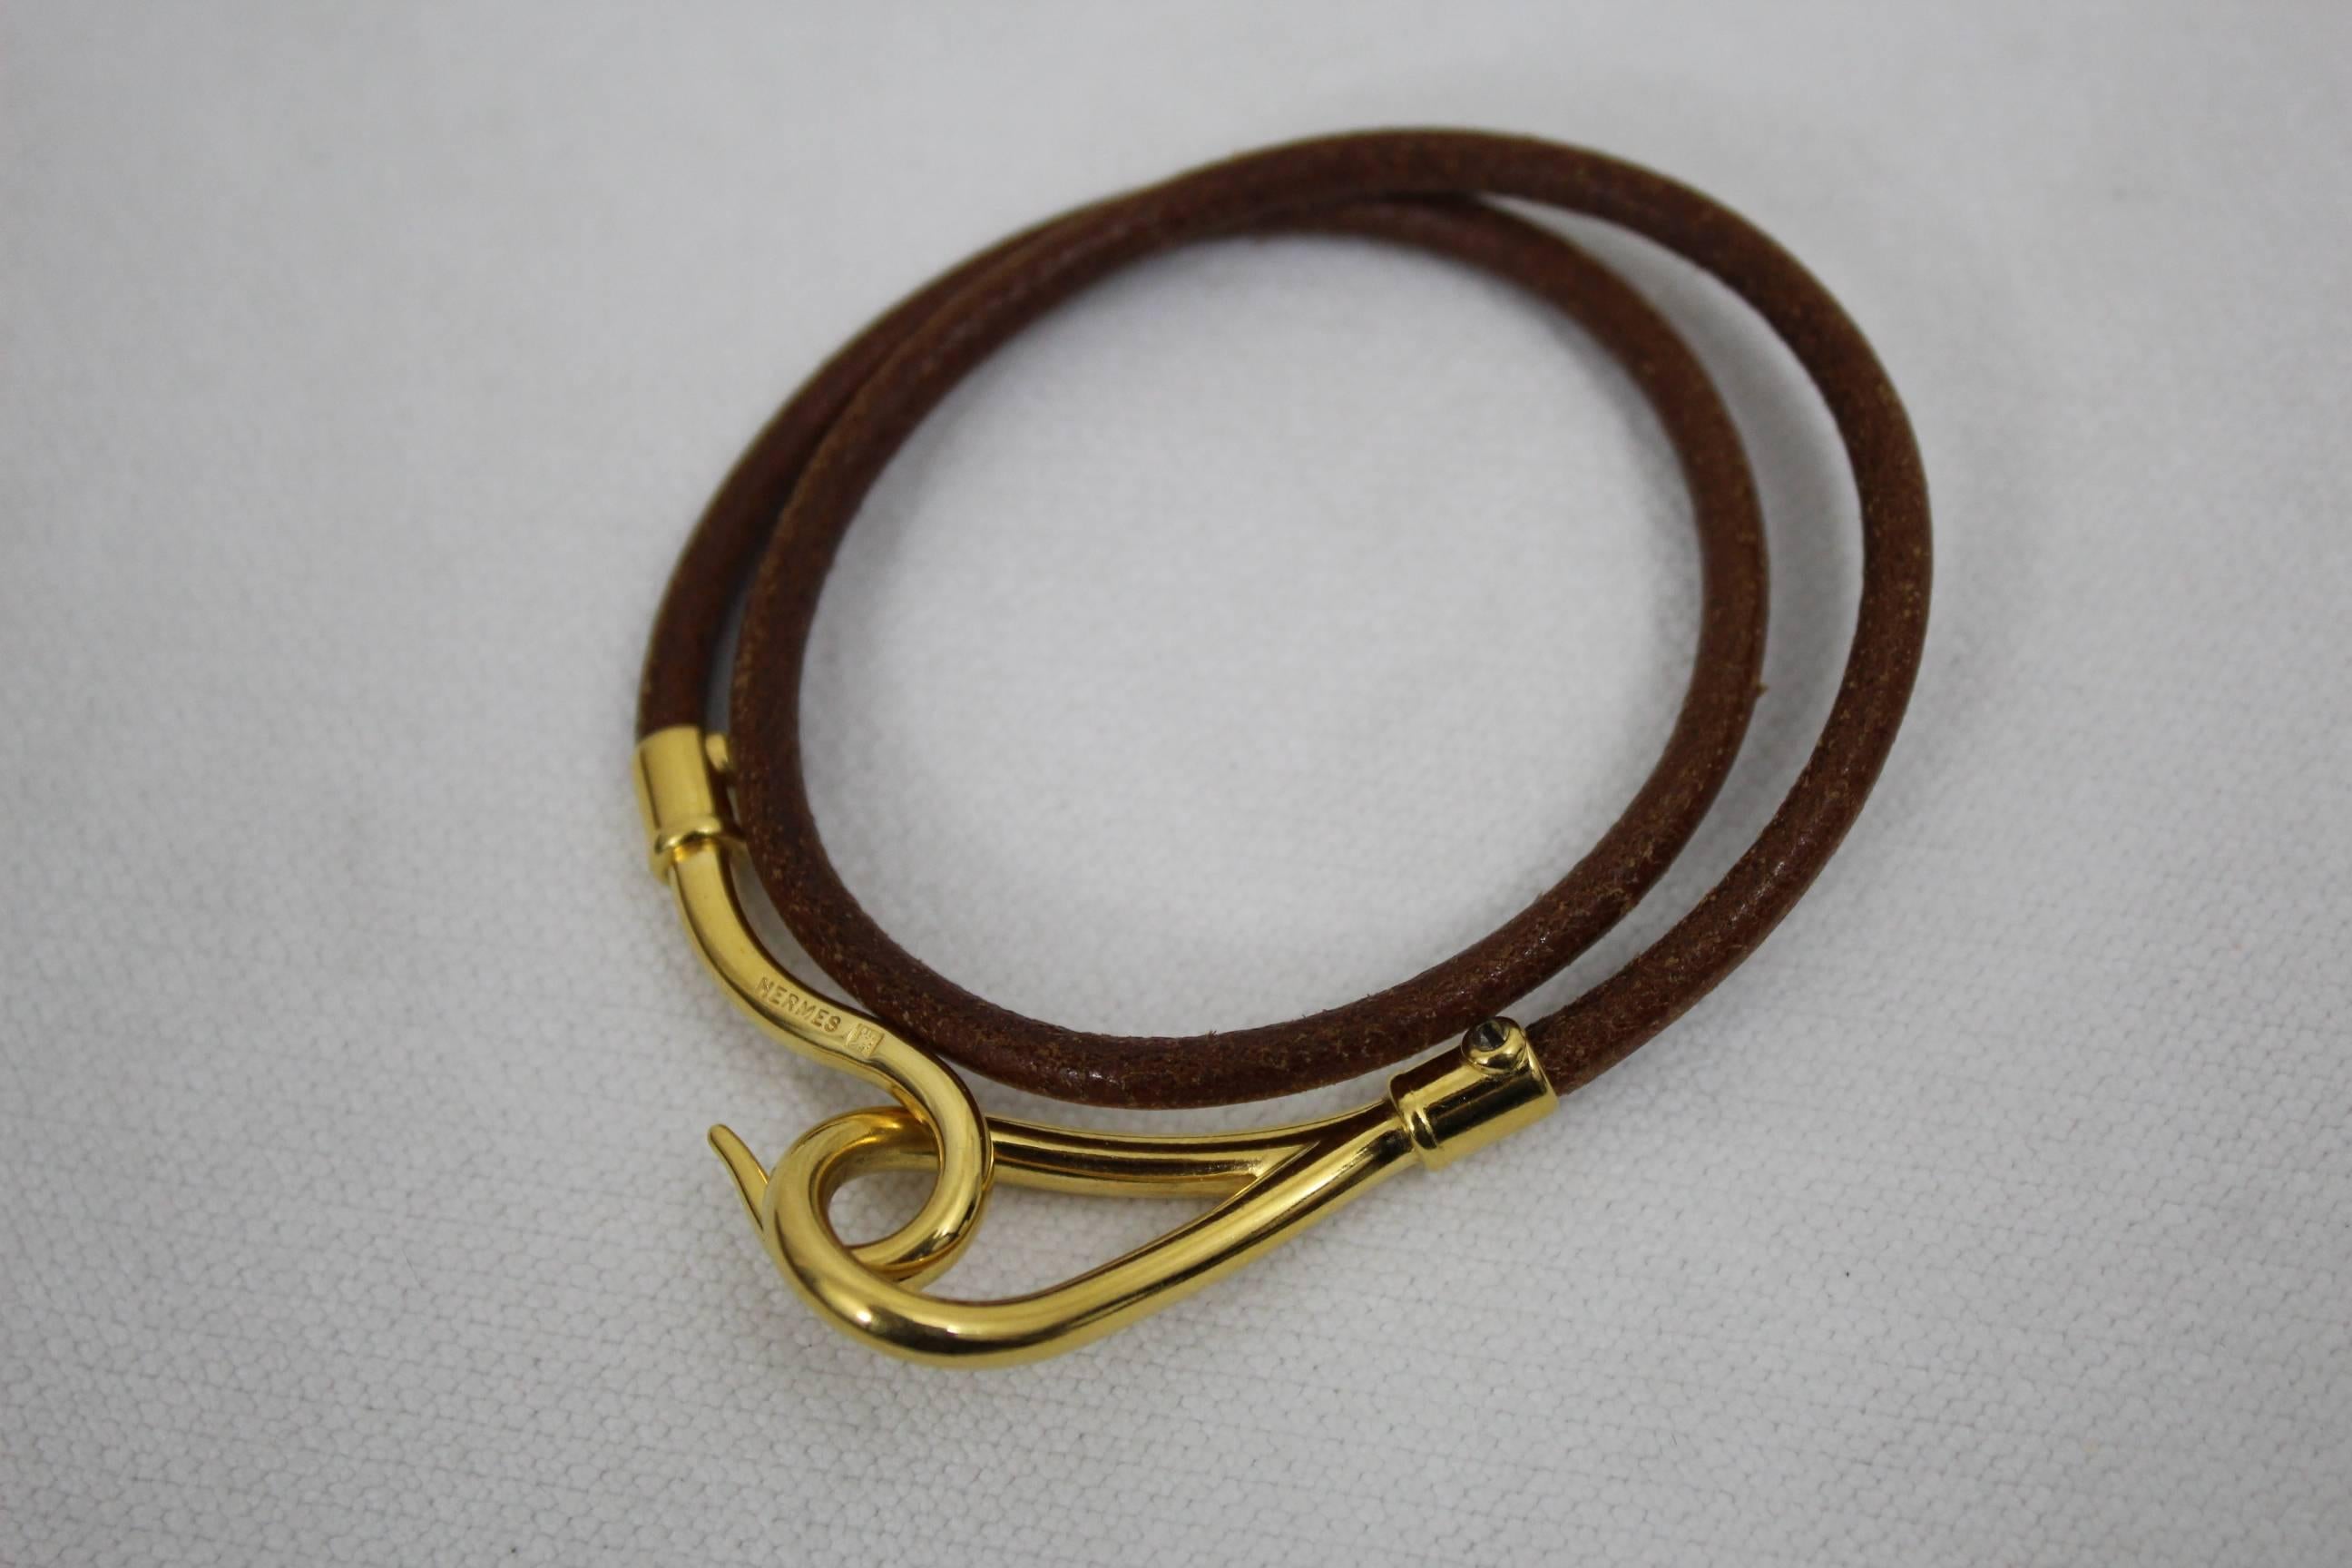 Nice Jumbo Gold Plated bracelet in brown leather.
Lenght 36 cm